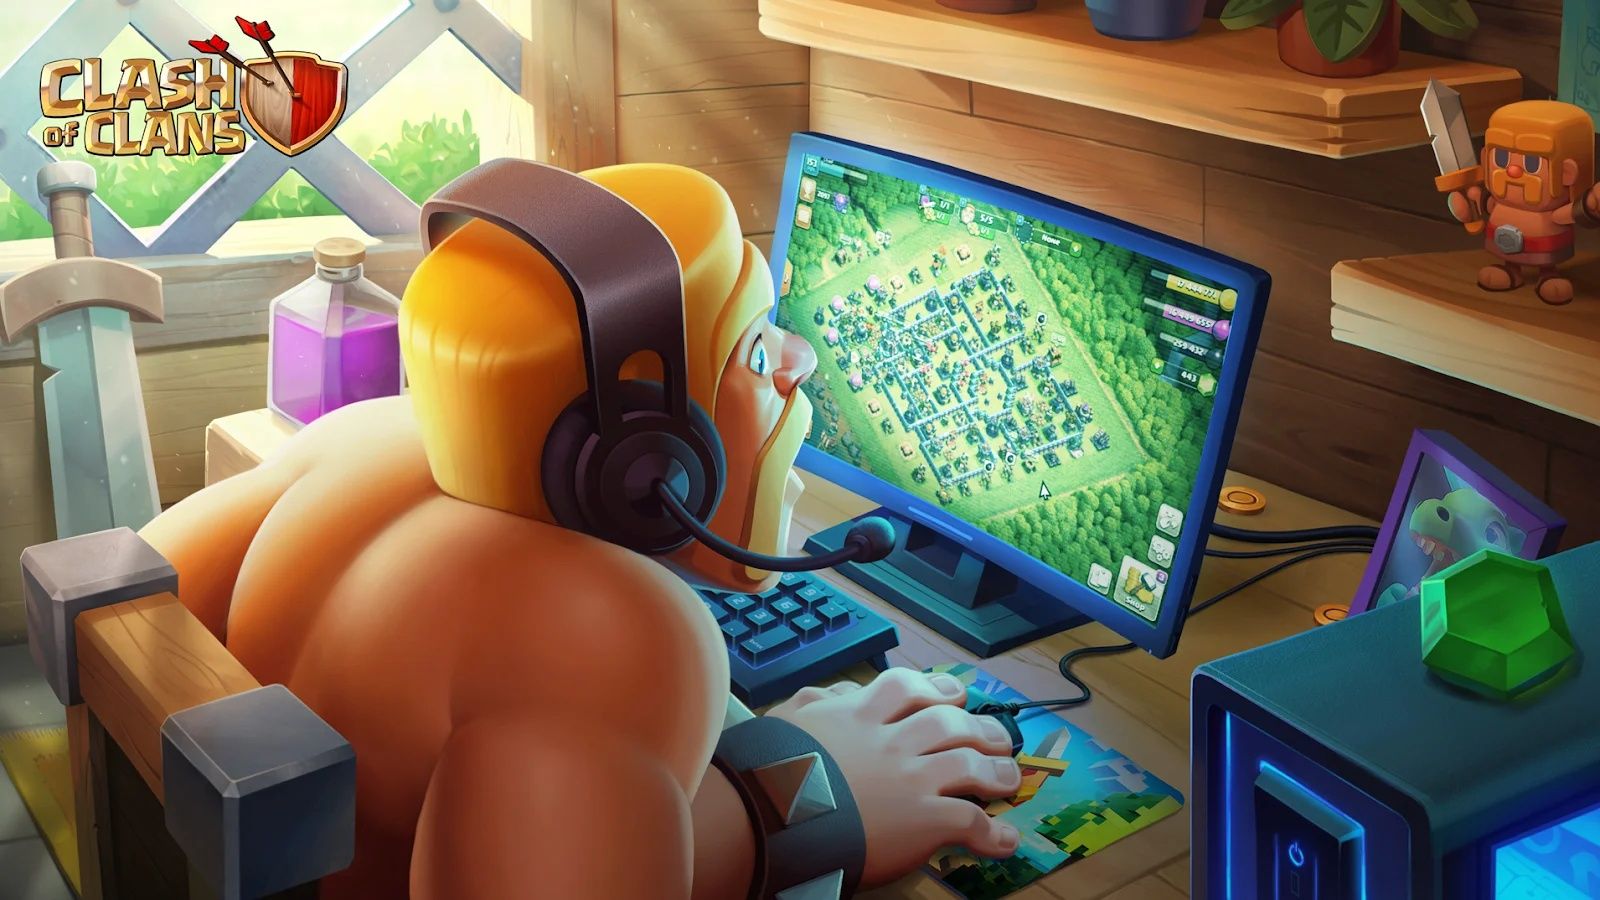 A Clash of Clans character playing Clash of Clans on a PC